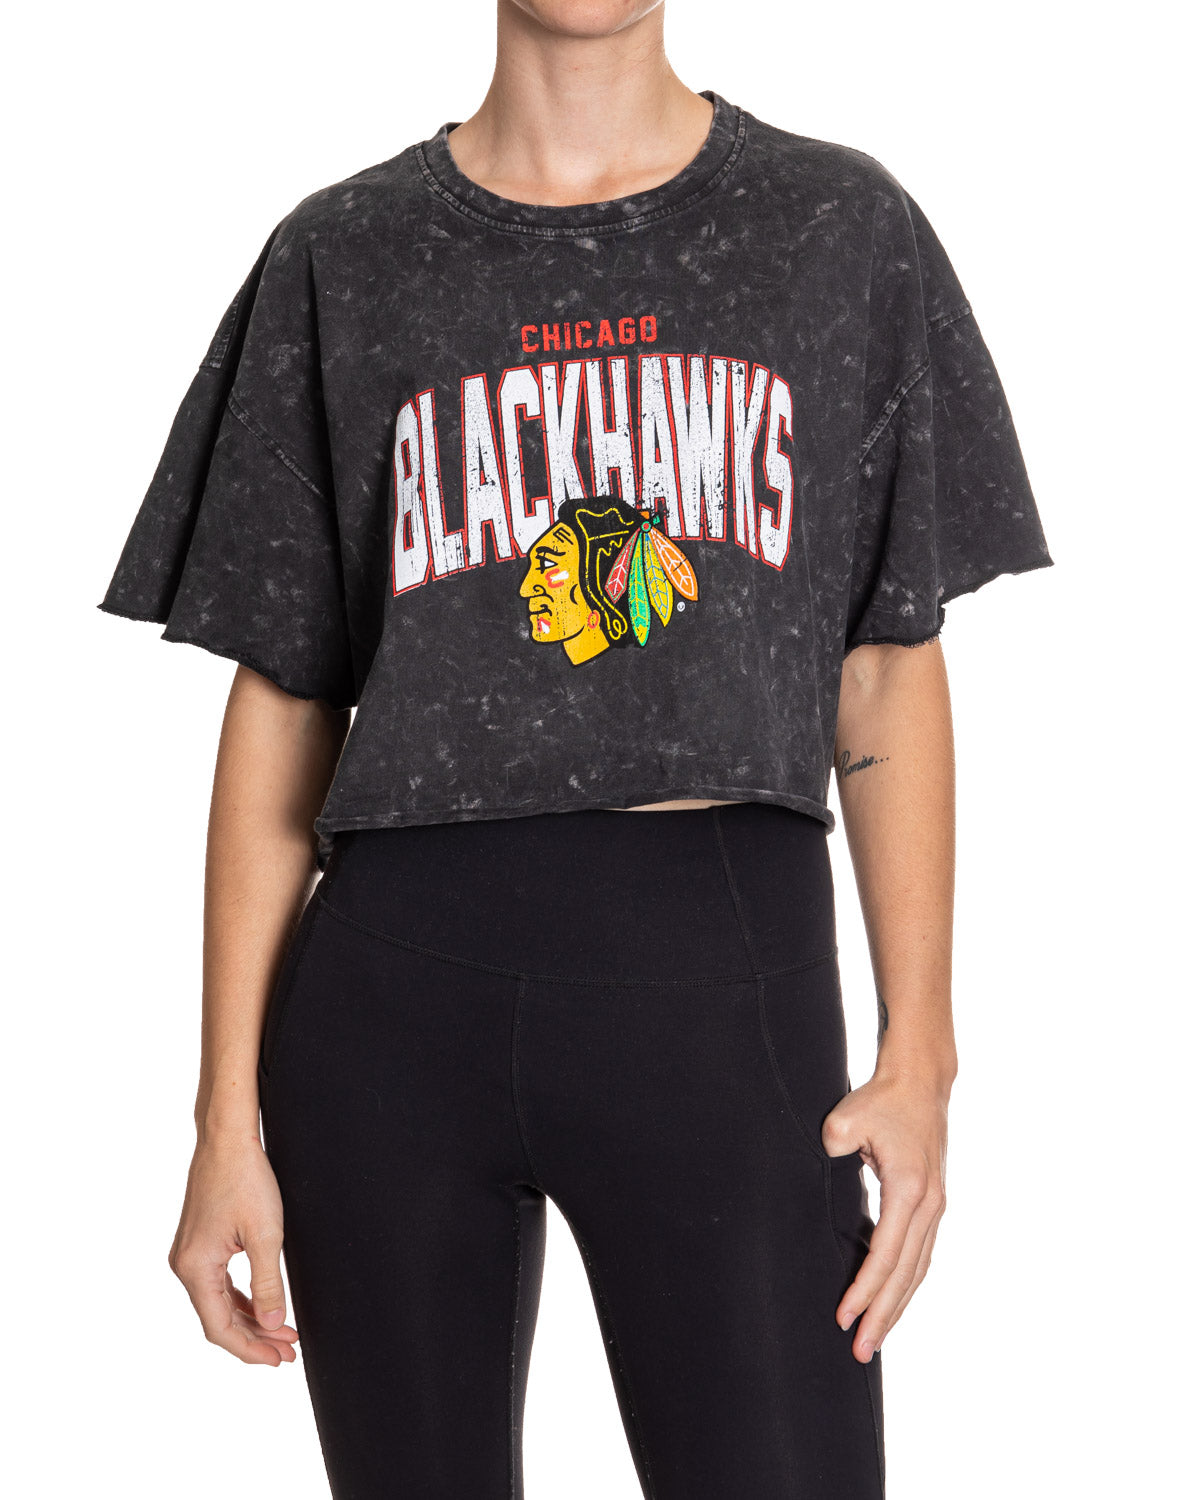 Woman standing in front of a white background, wearing an oversized black acid wash crop top - featuring a Chicago Blackhawks logo in the center of the shirt.